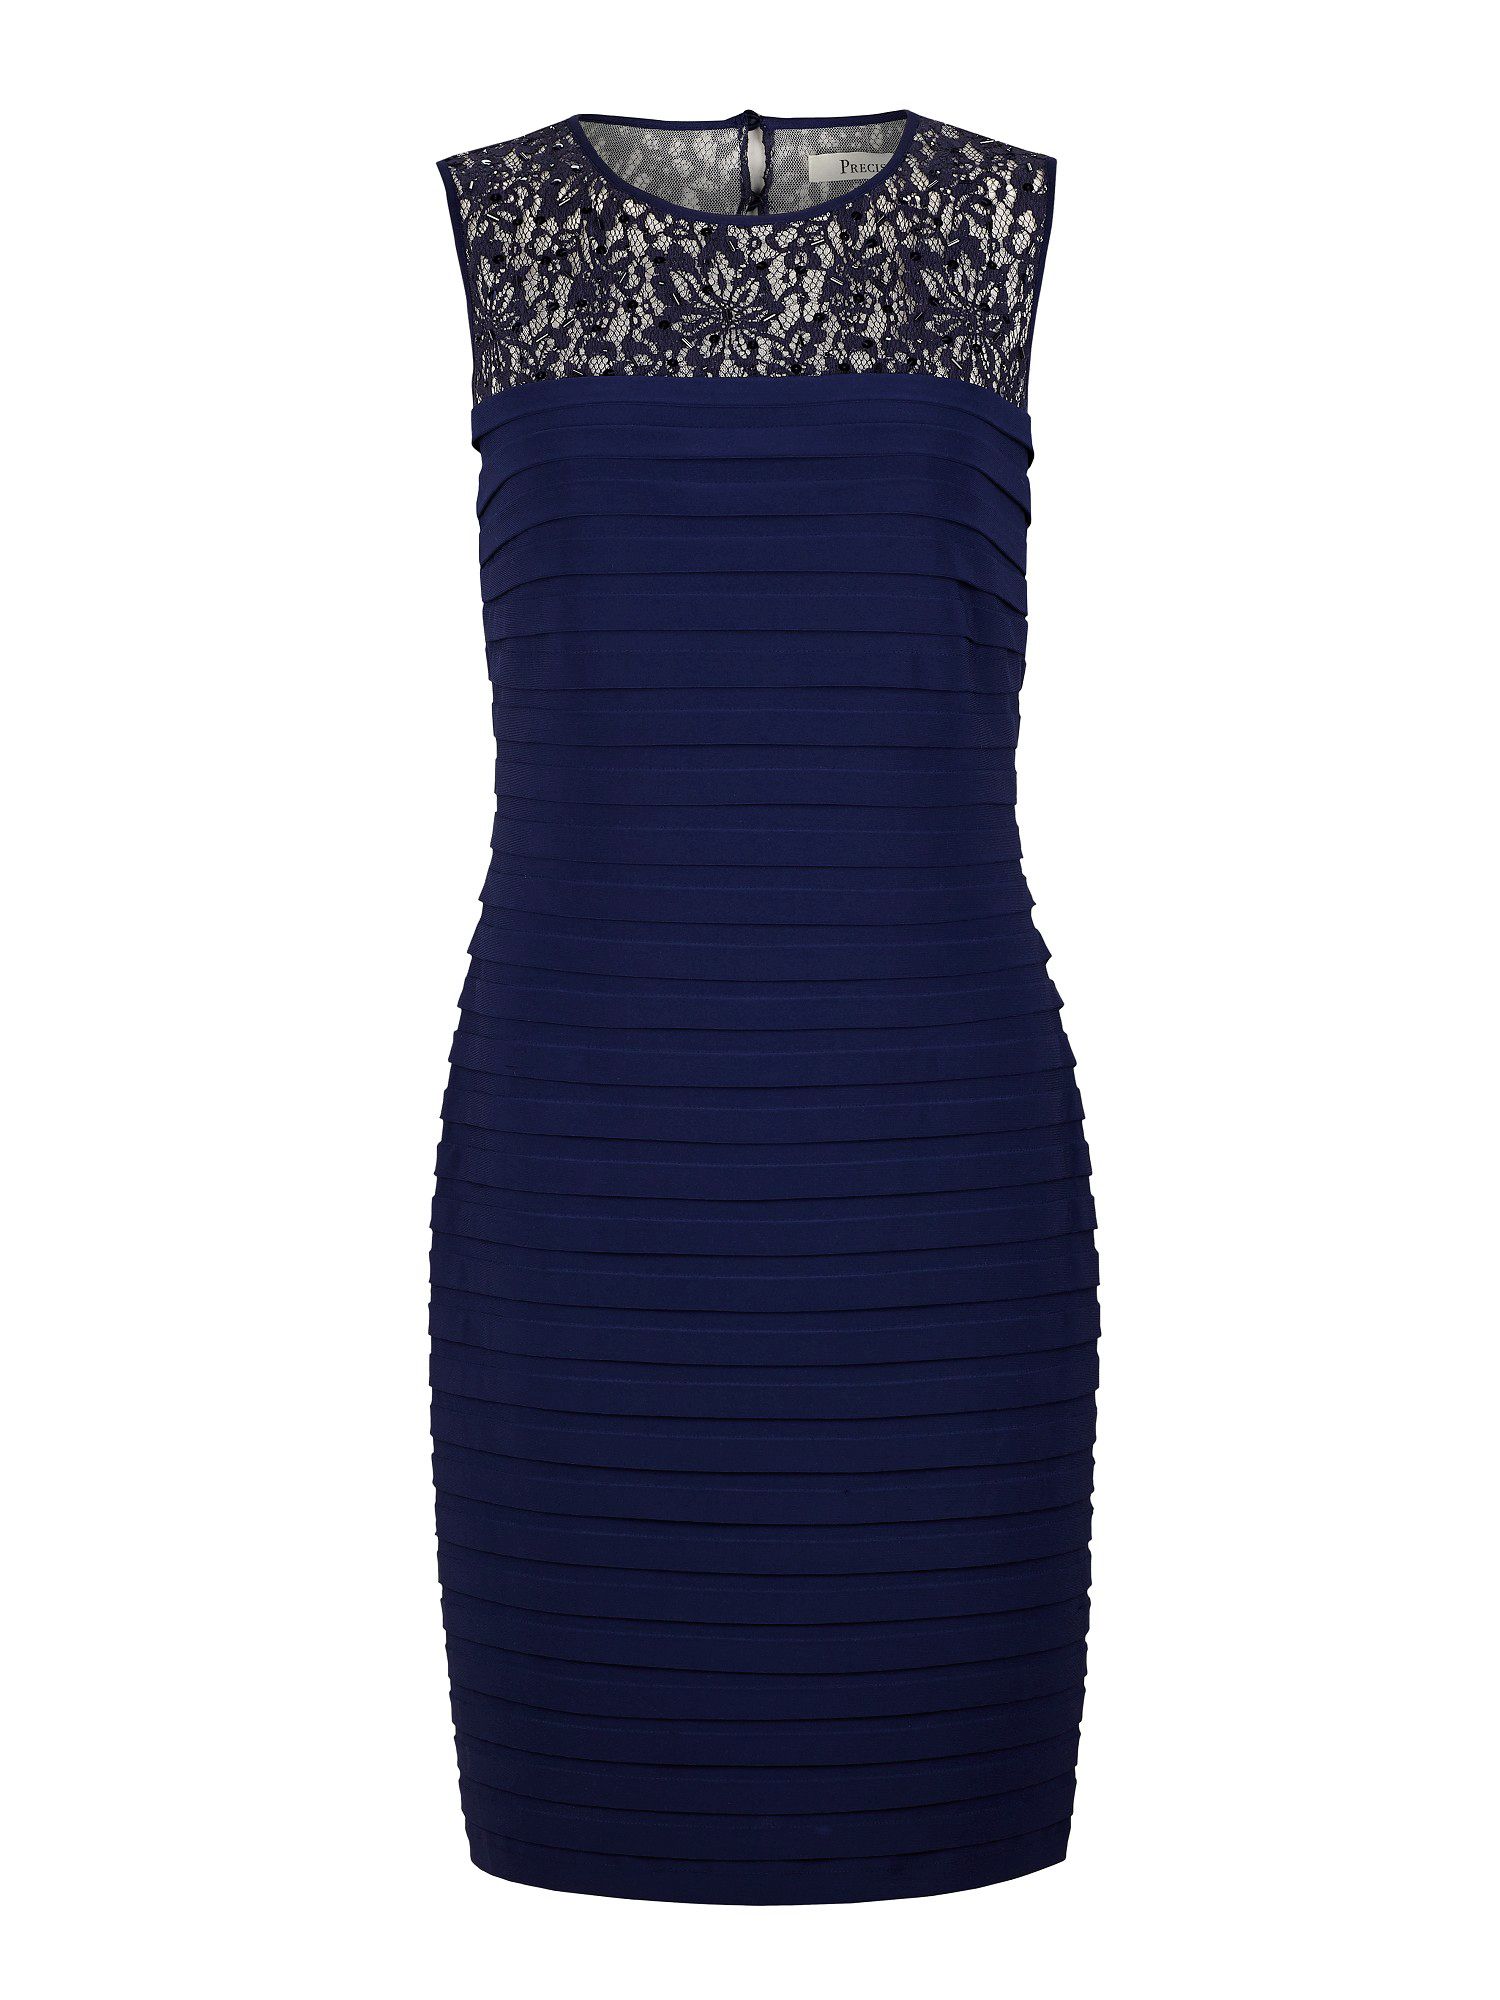 Precis Petite Navy Pleated Embellished Dress in Blue | Lyst